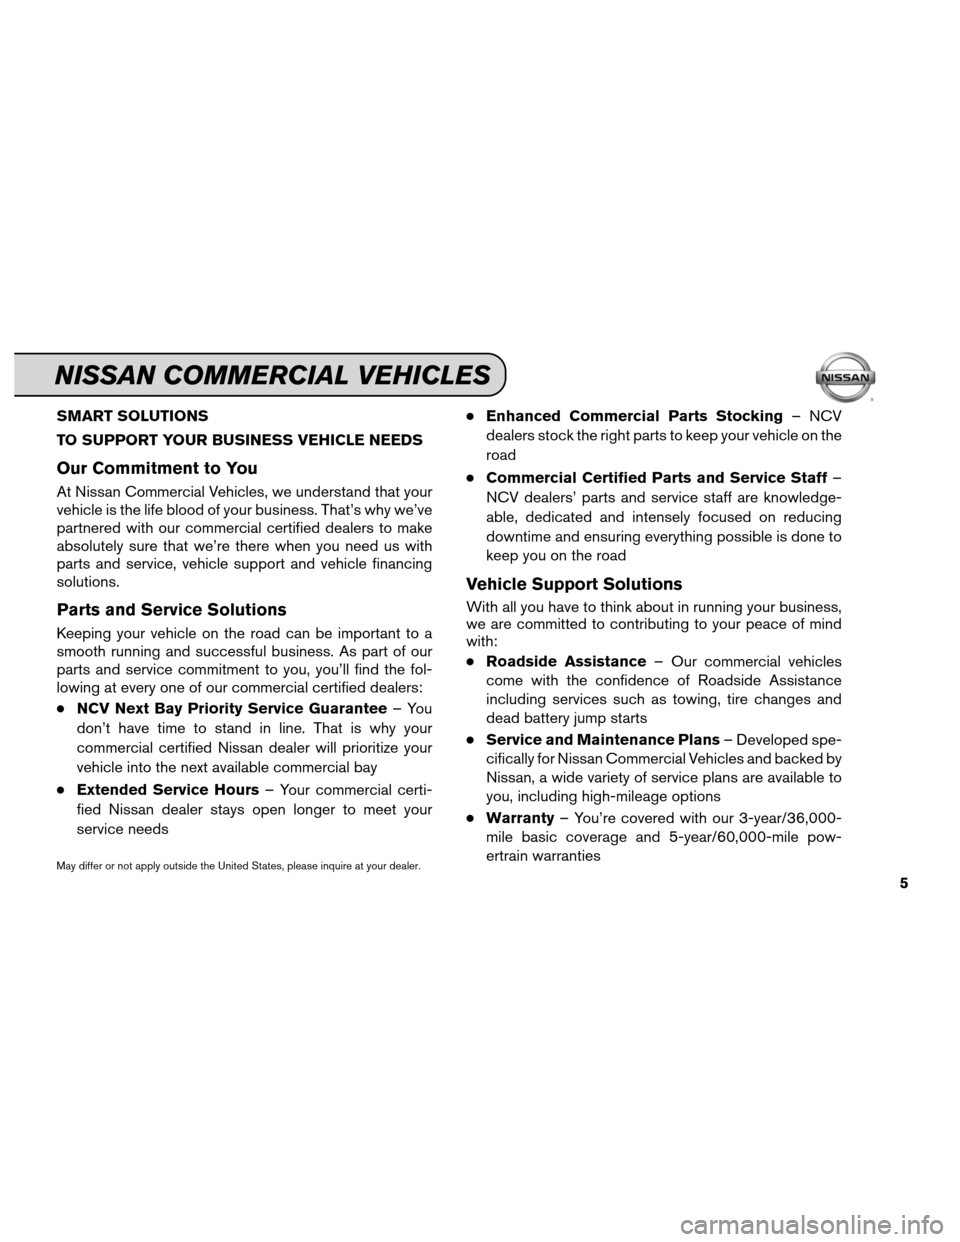 NISSAN PATHFINDER 2012 R52 / 4.G Service And Maintenance Guide SMART SOLUTIONS
TO SUPPORT YOUR BUSINESS VEHICLE NEEDS
Our Commitment to You
At Nissan Commercial Vehicles, we understand that your
vehicle is the life blood of your business. That’s why we’ve
par